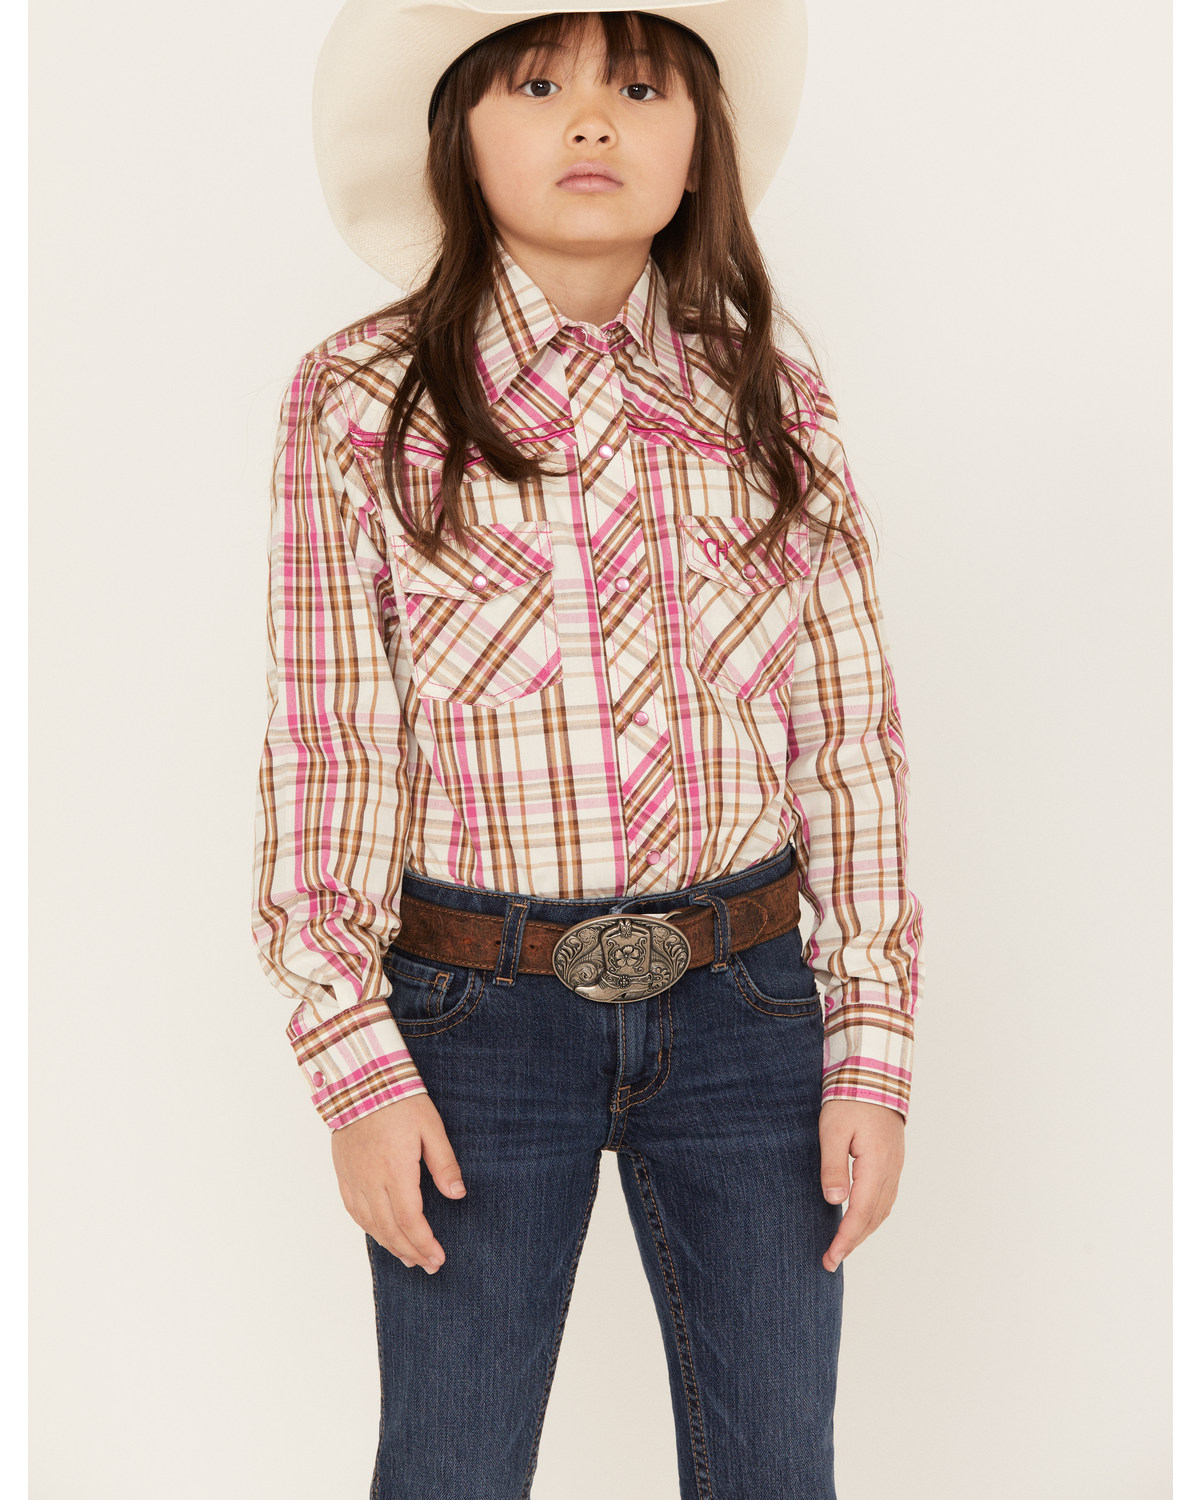 Cowgirl Hardware Girls' Embroidered Horse Plaid Print Long Sleeve Pearl Snap Western Shirt